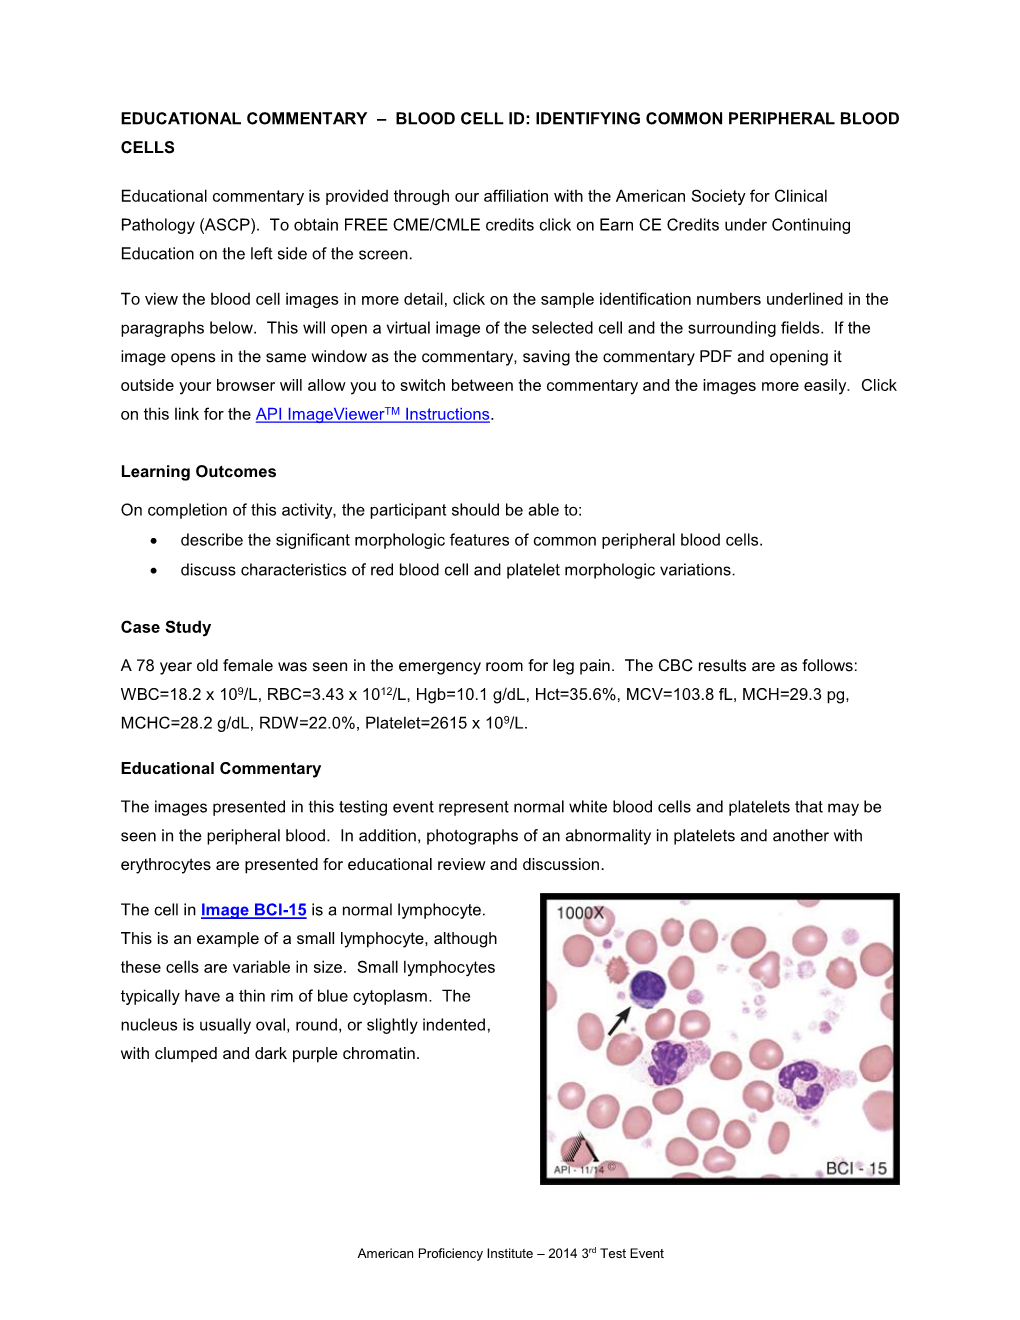 Educational Commentary – Blood Cell Id: Identifying Common Peripheral Blood Cells